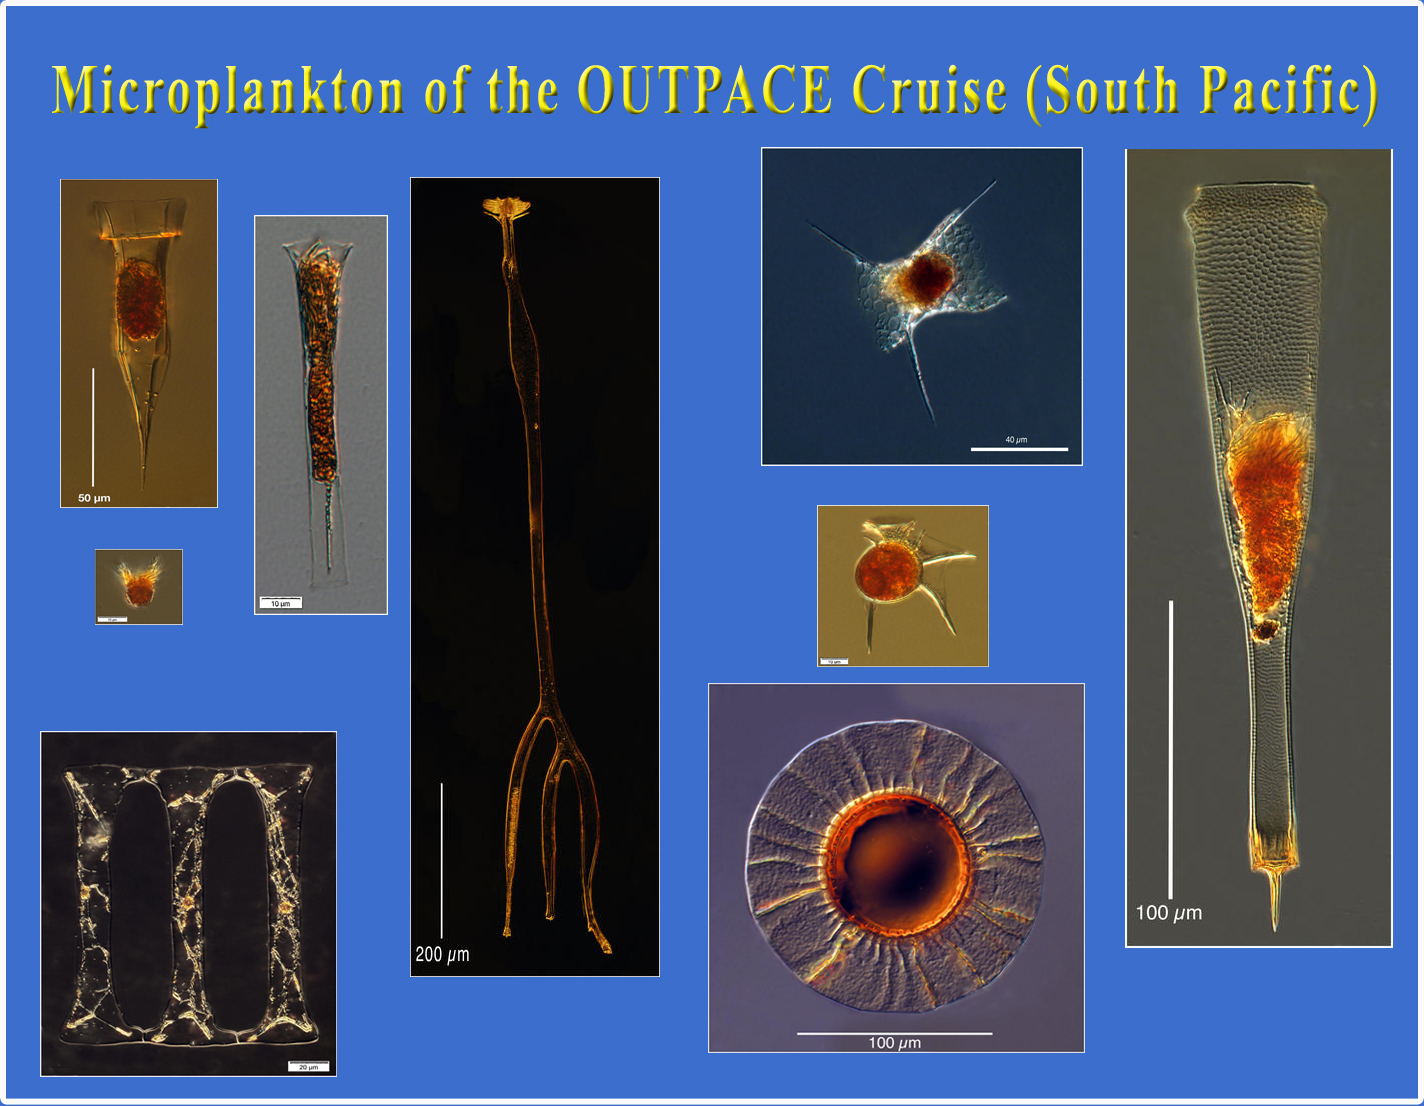 OUTPACE Microplankton